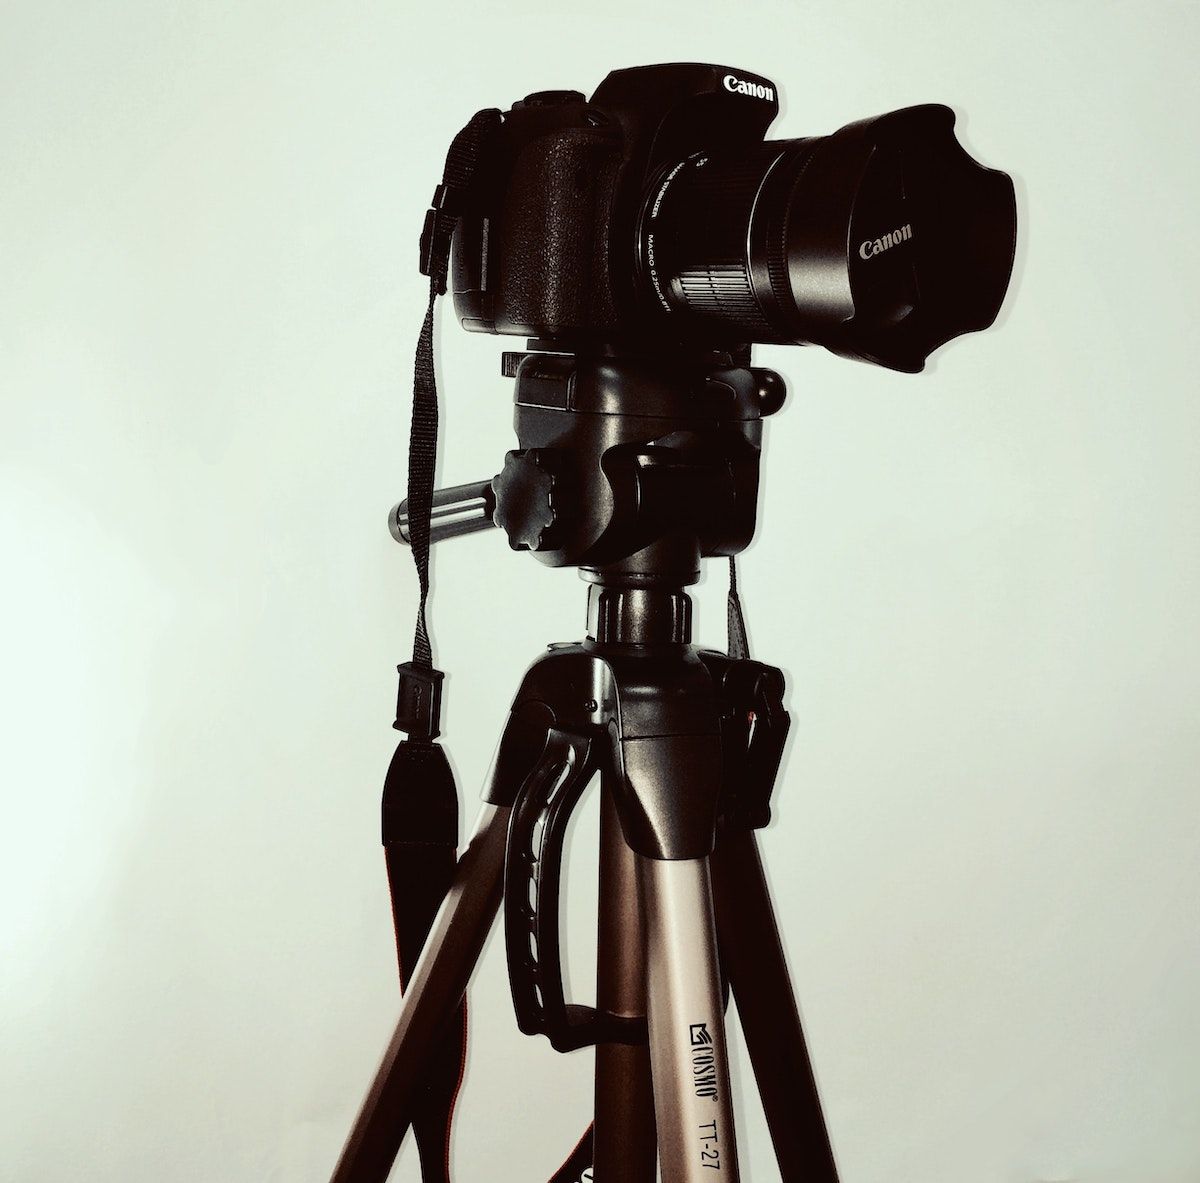 Best tripods for camera